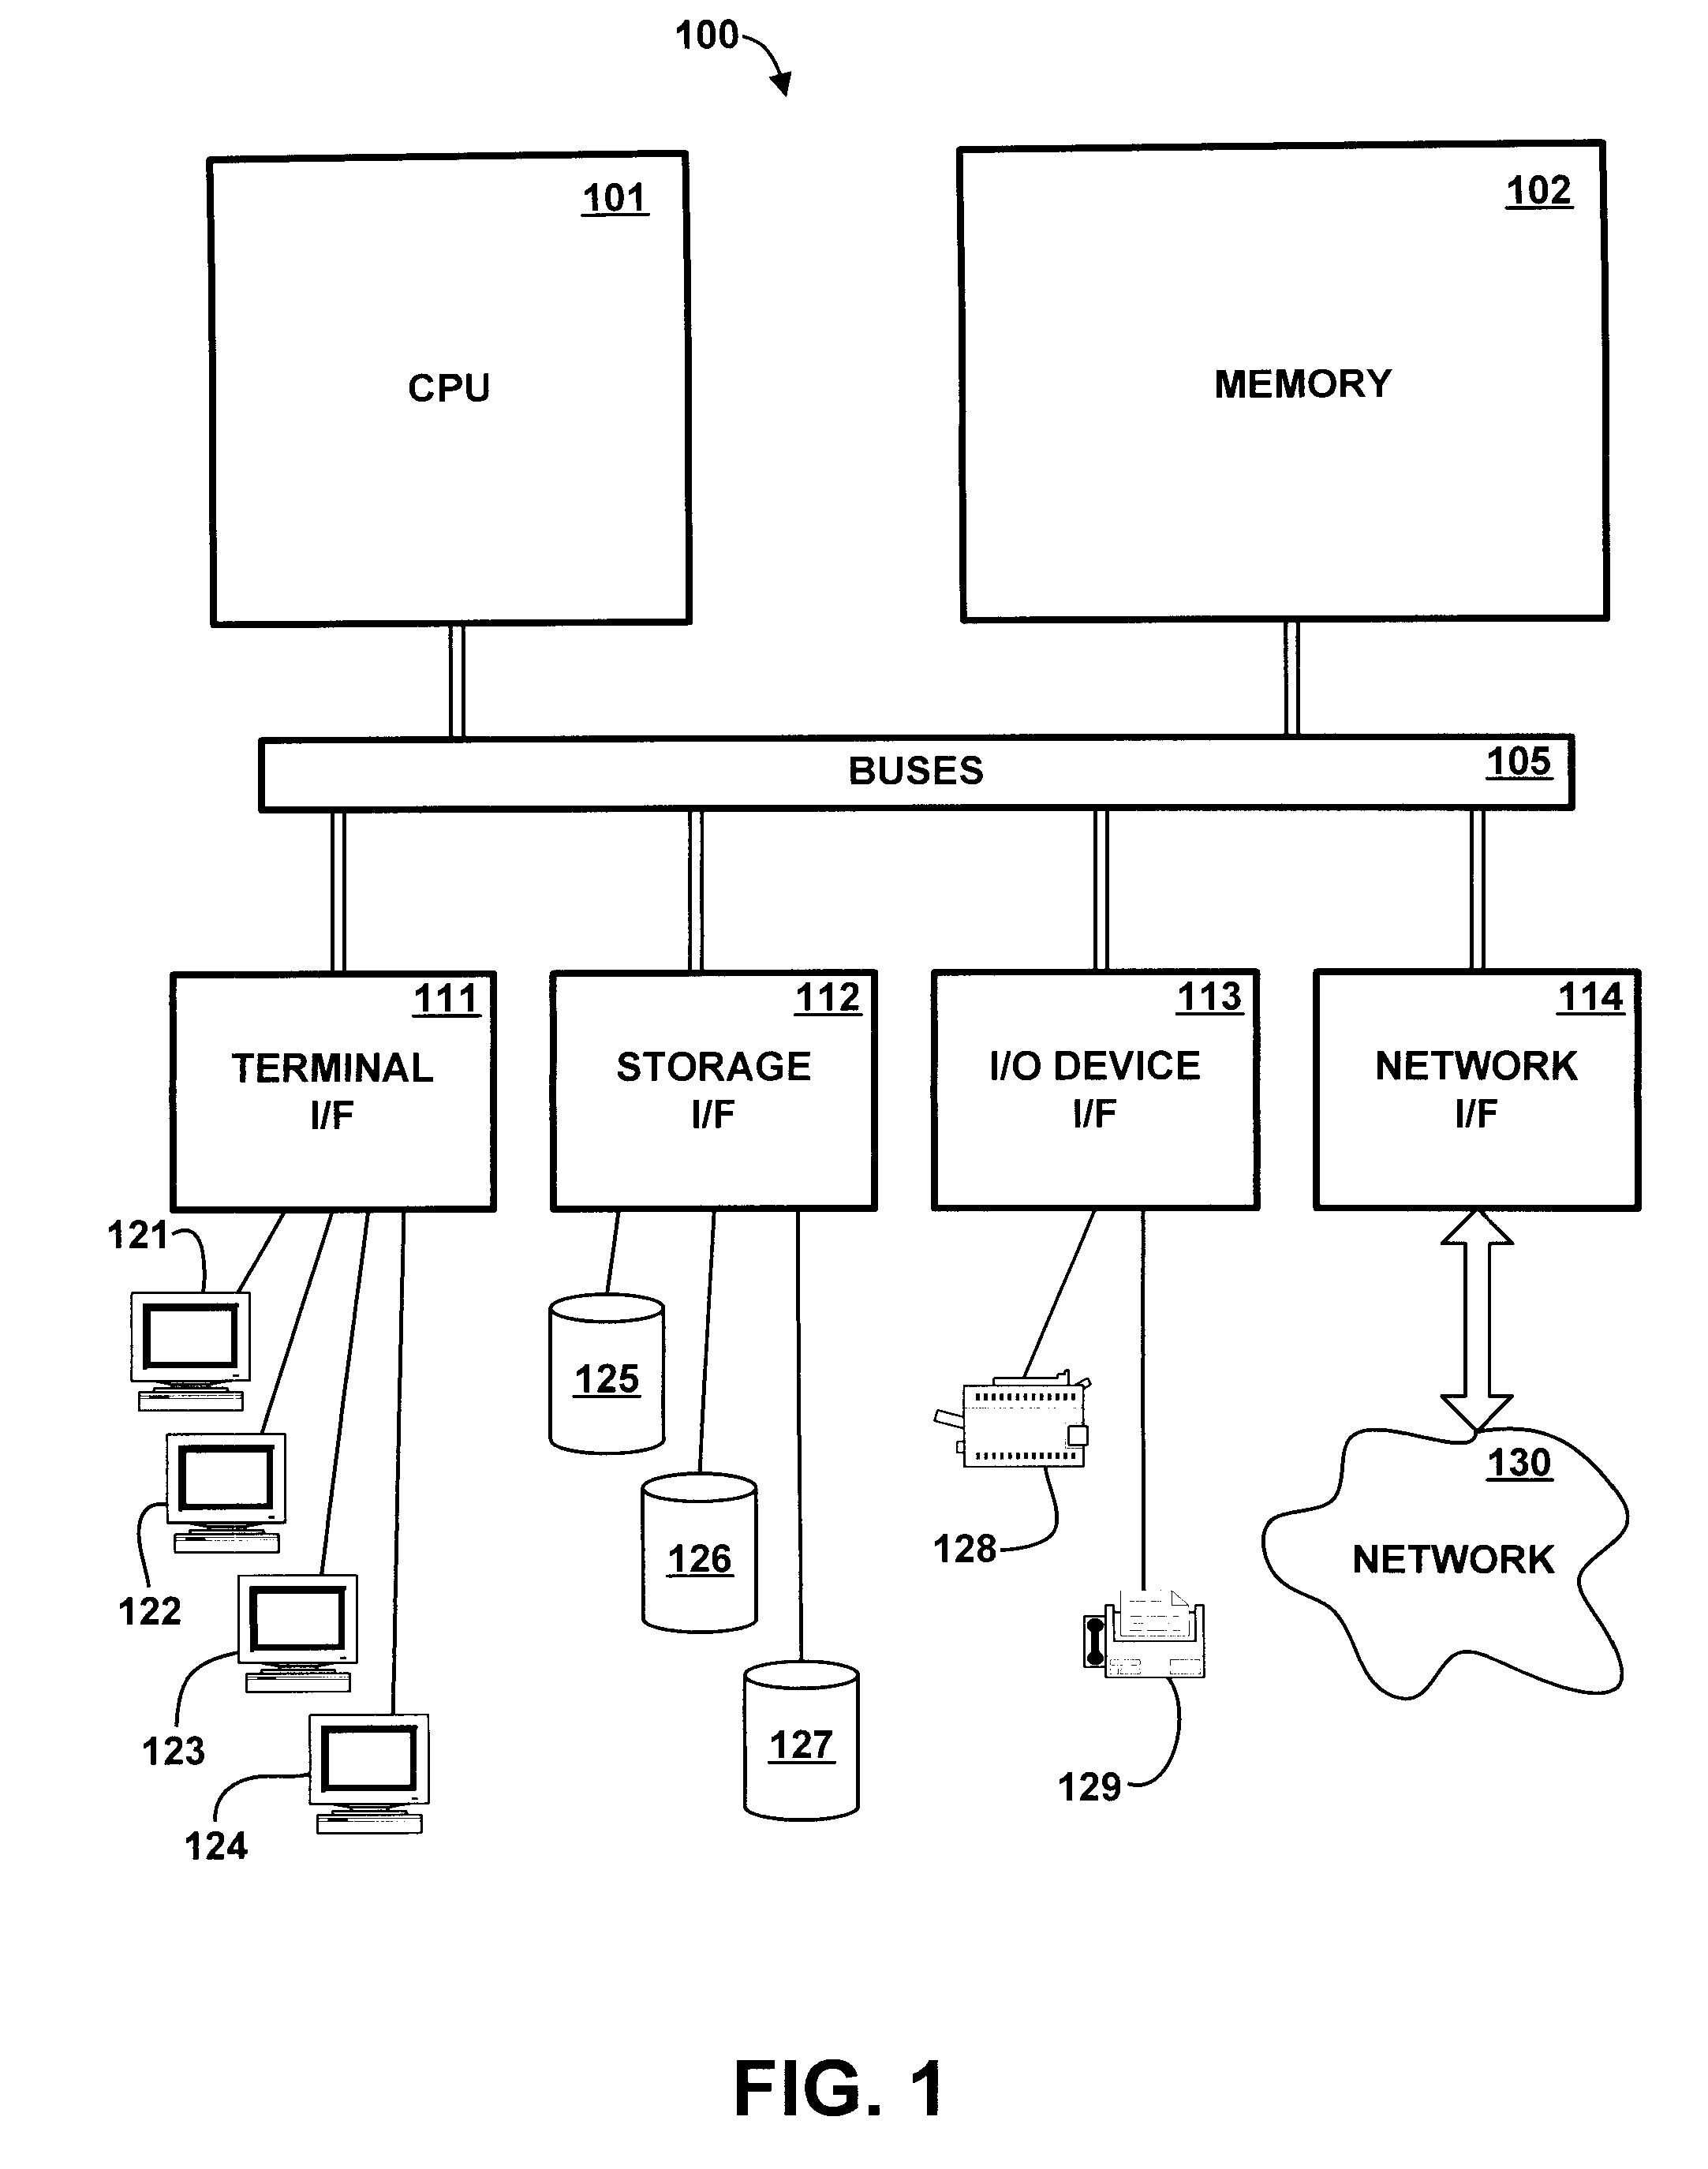 Method and Apparatus for Autonomically Maintaining Latent Auxiliary Database Structures for Use in Executing Database Queries